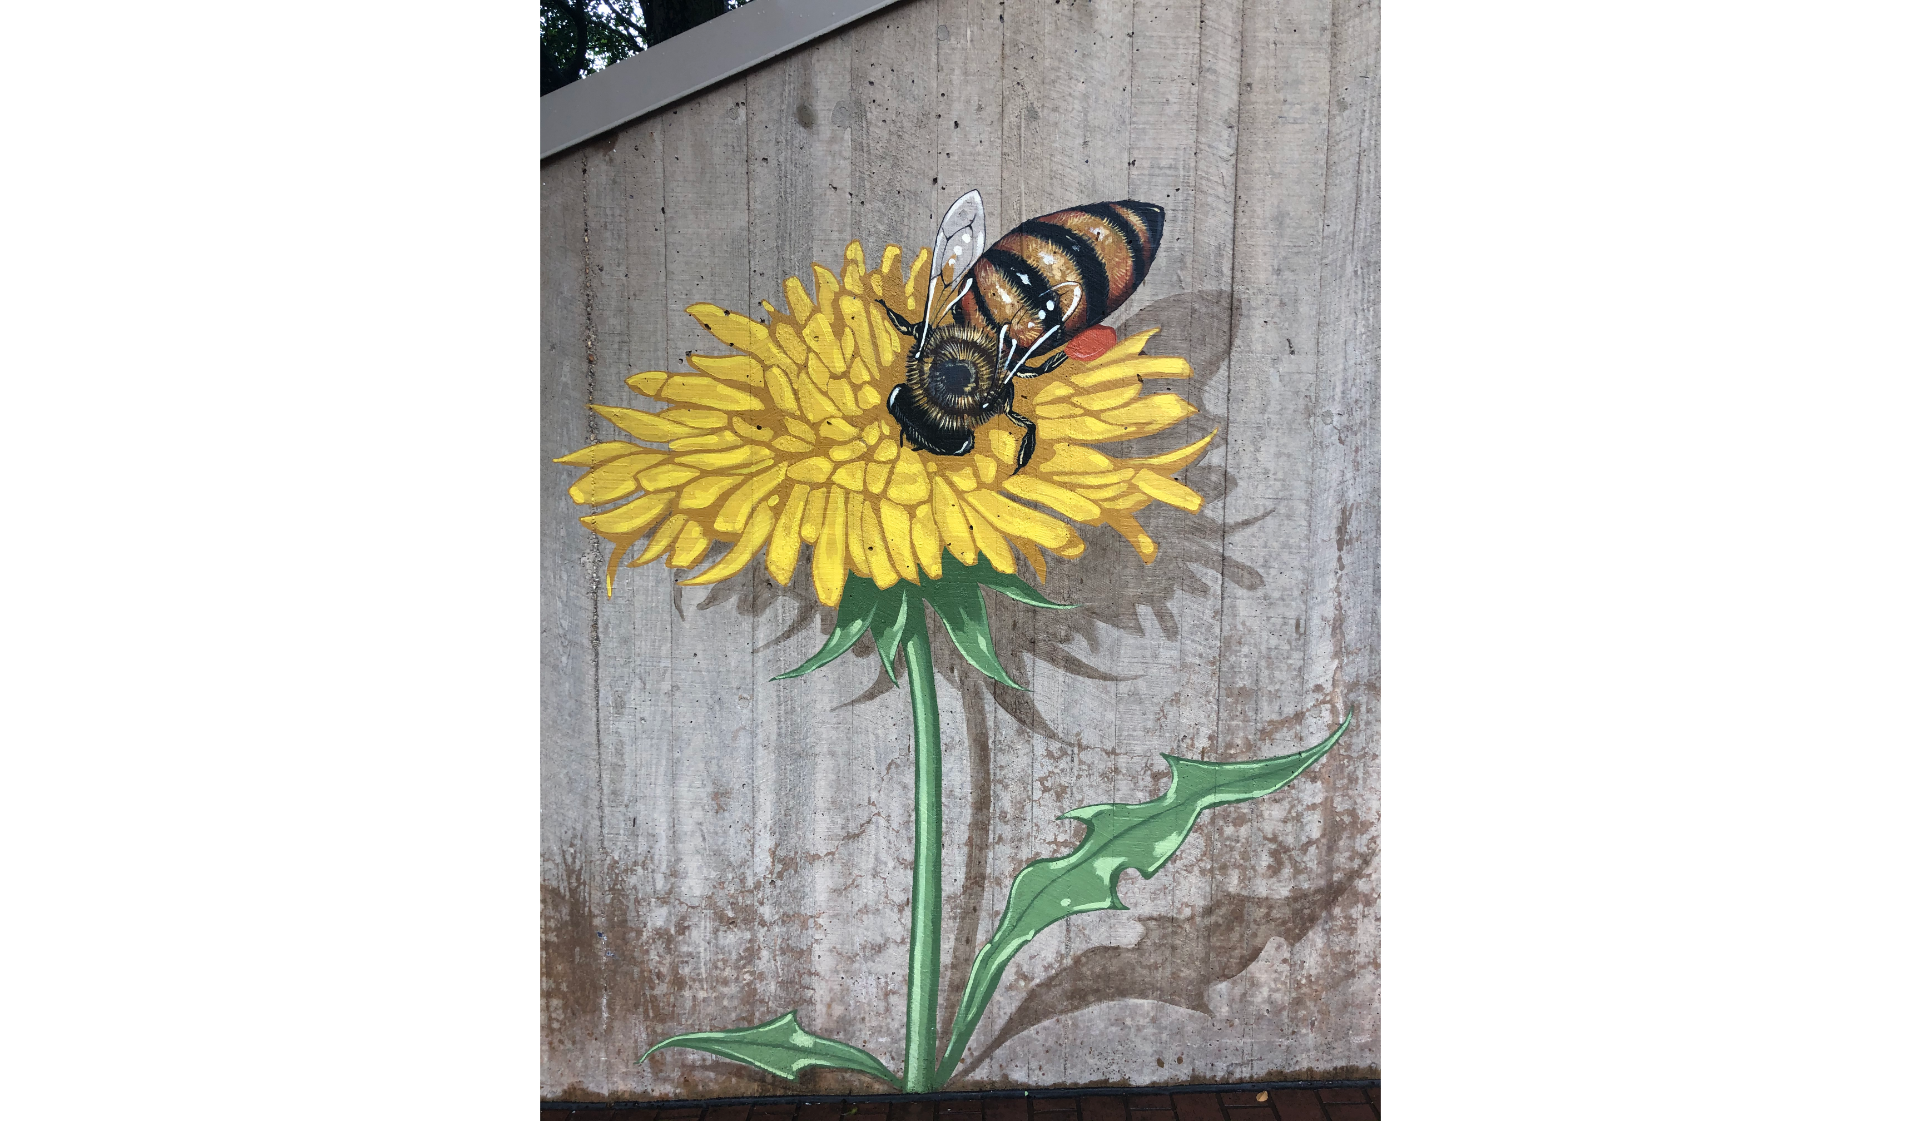 smithsonian-s-national-zoo-mural-the-good-of-the-hive